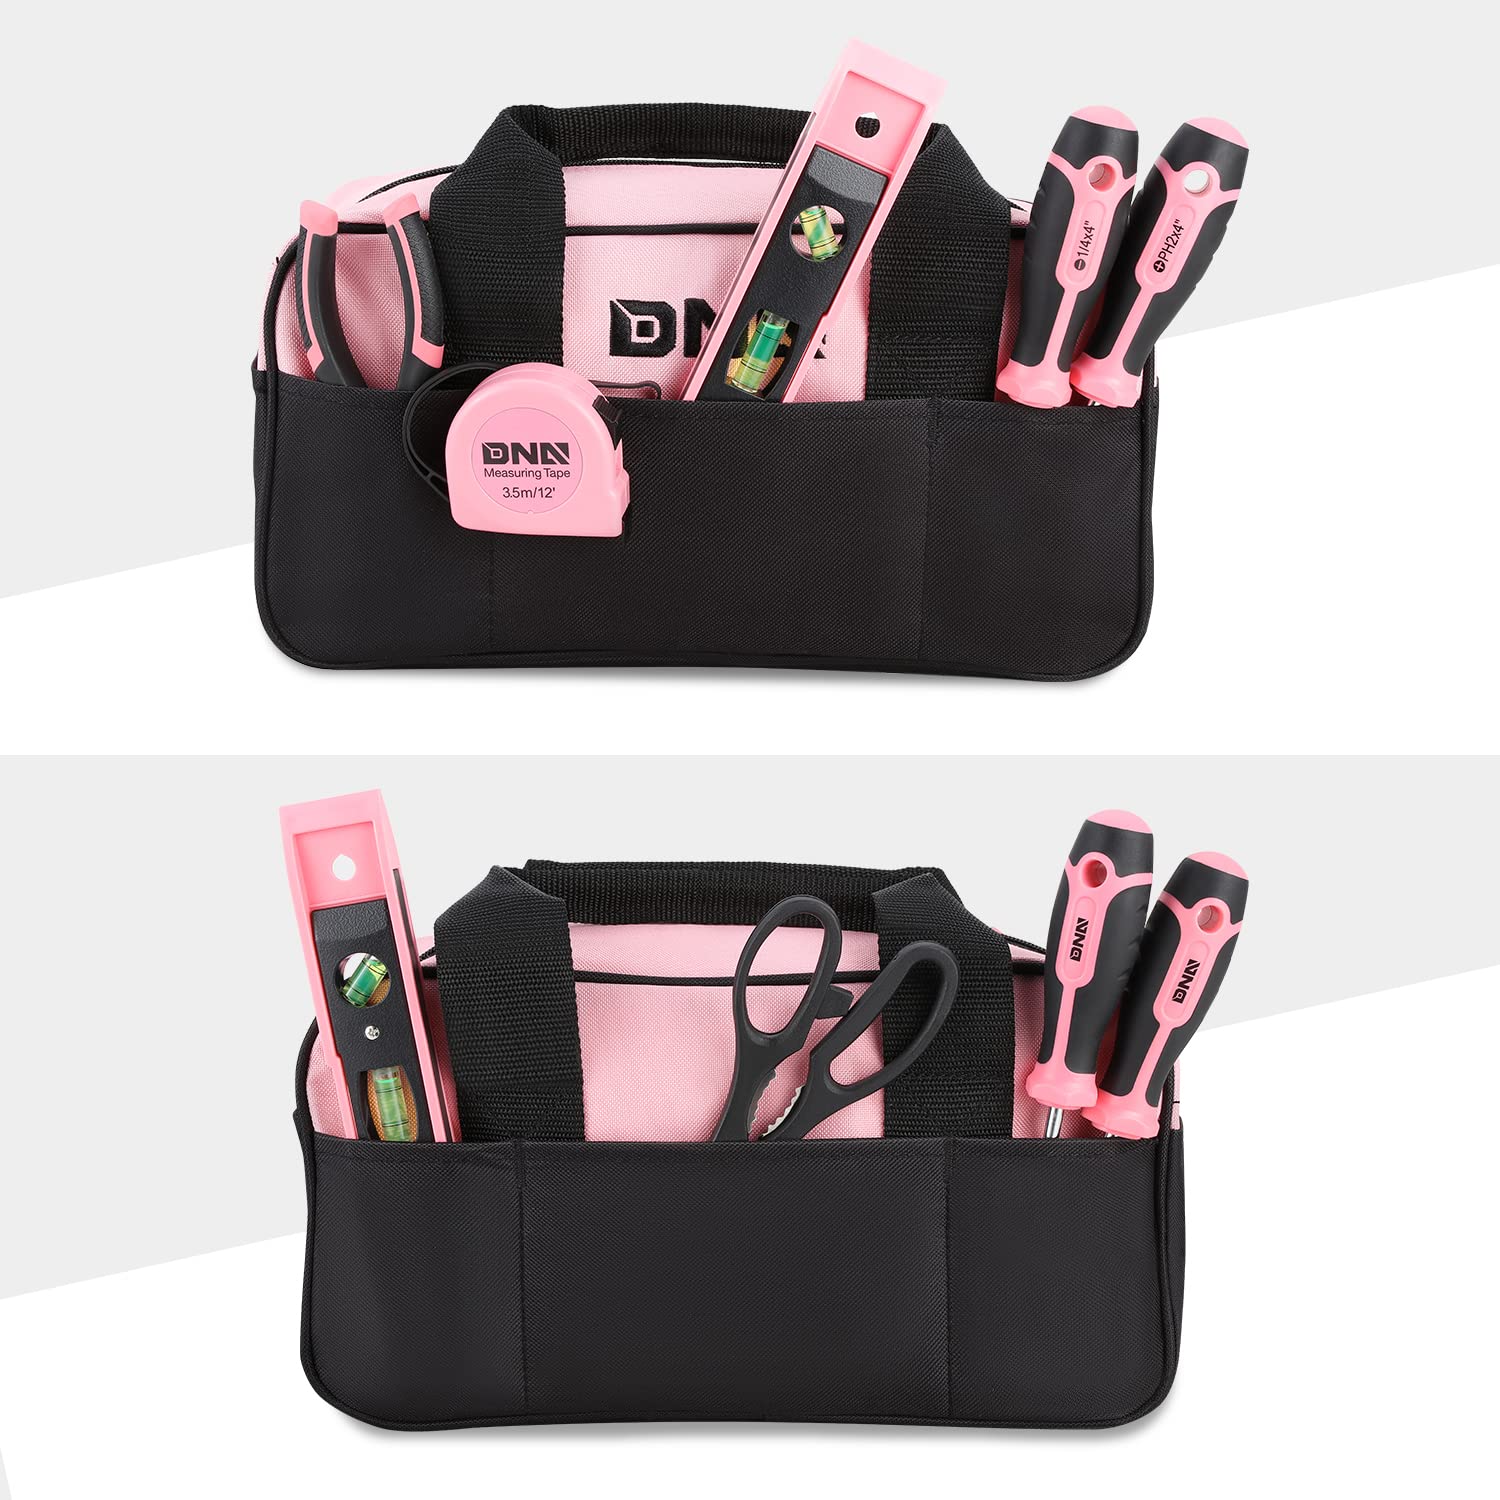 ‎DNA MOTORING TOOLS-00203 Home Repairing Tool Set - 7 Pcs Household DIY Hand Tool Kit with Wide-open Mouth Canvas Storage Bag, Pink